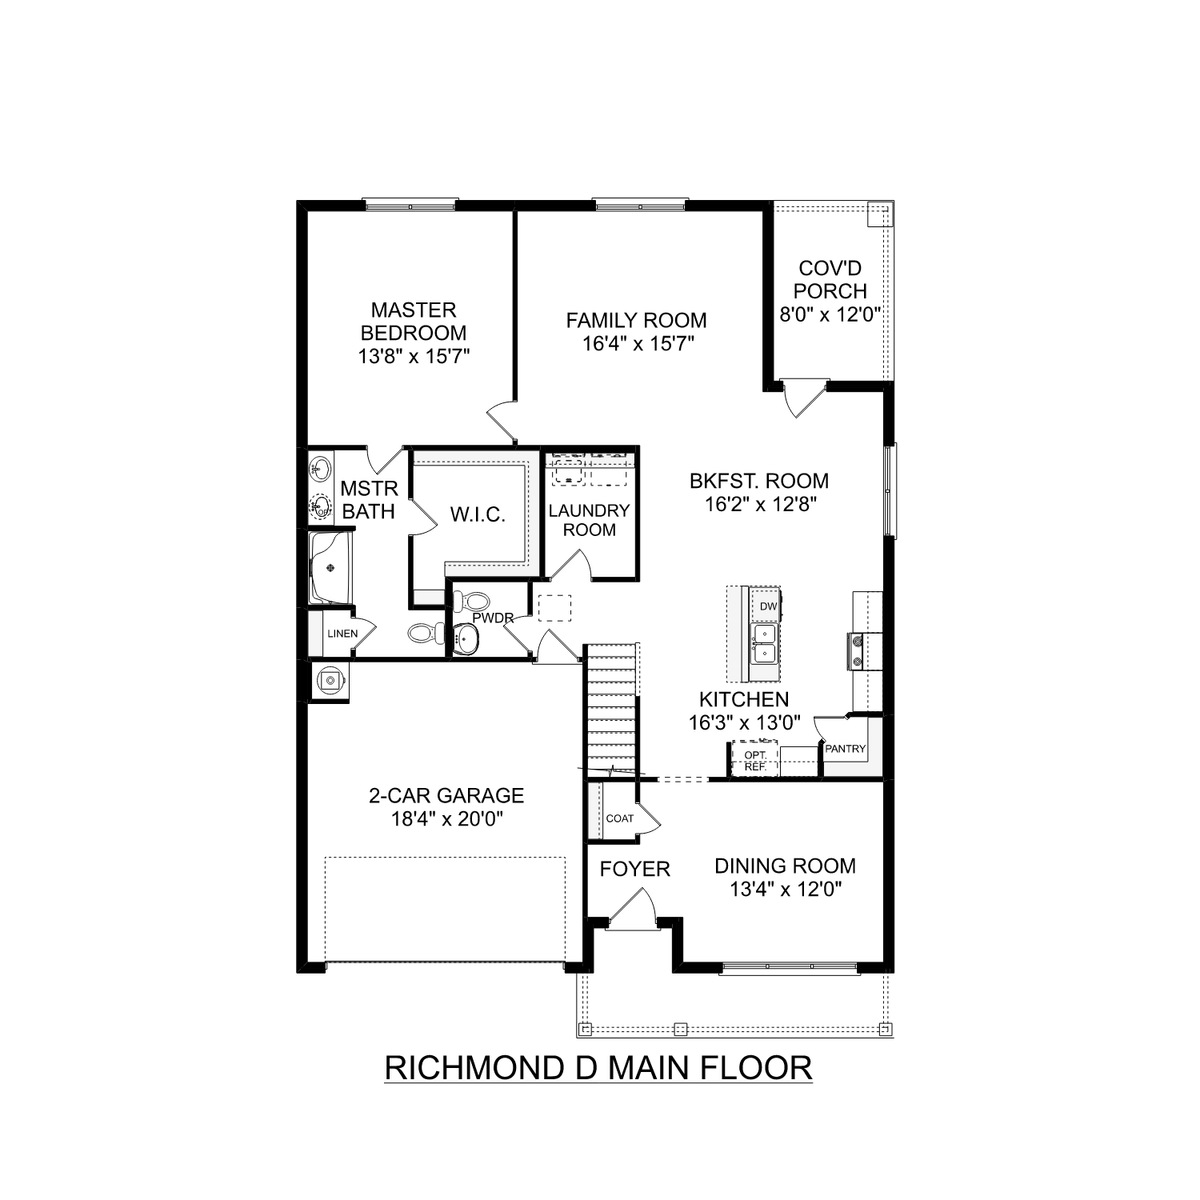 1 - The Richmond D buildable floor plan layout in Davidson Homes' Clearview community.